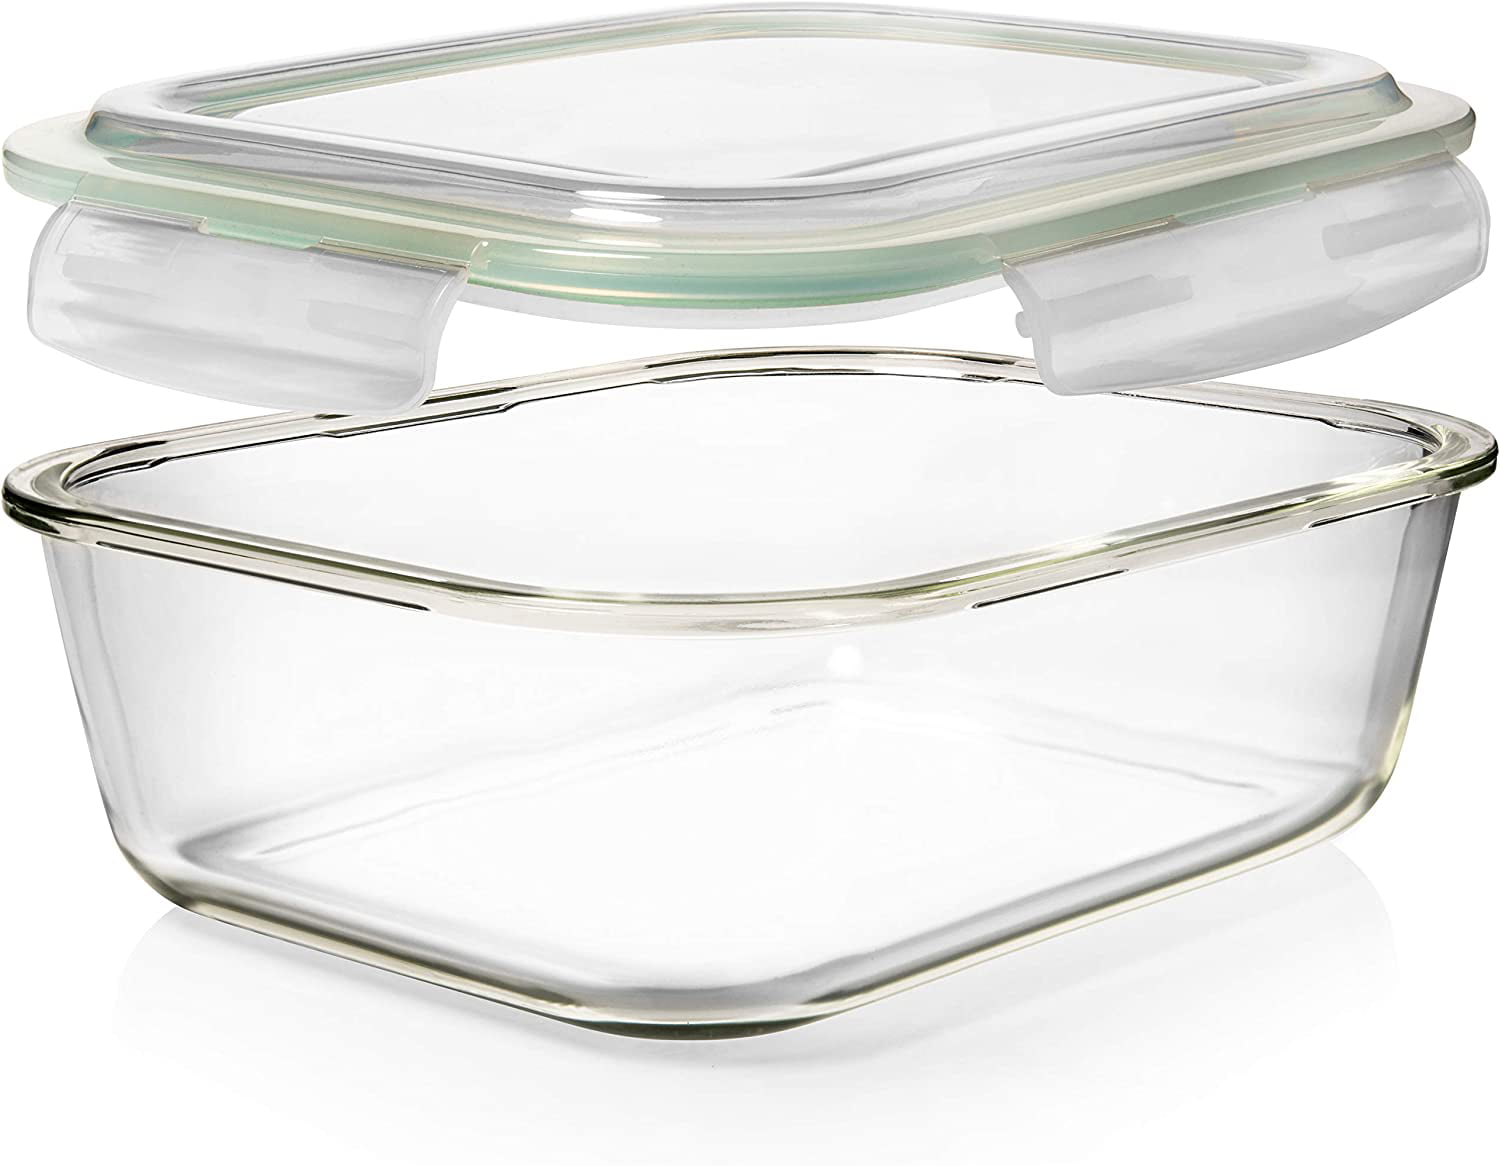 Razab Glass Food Storage Airtight Containers, Microwave Safe